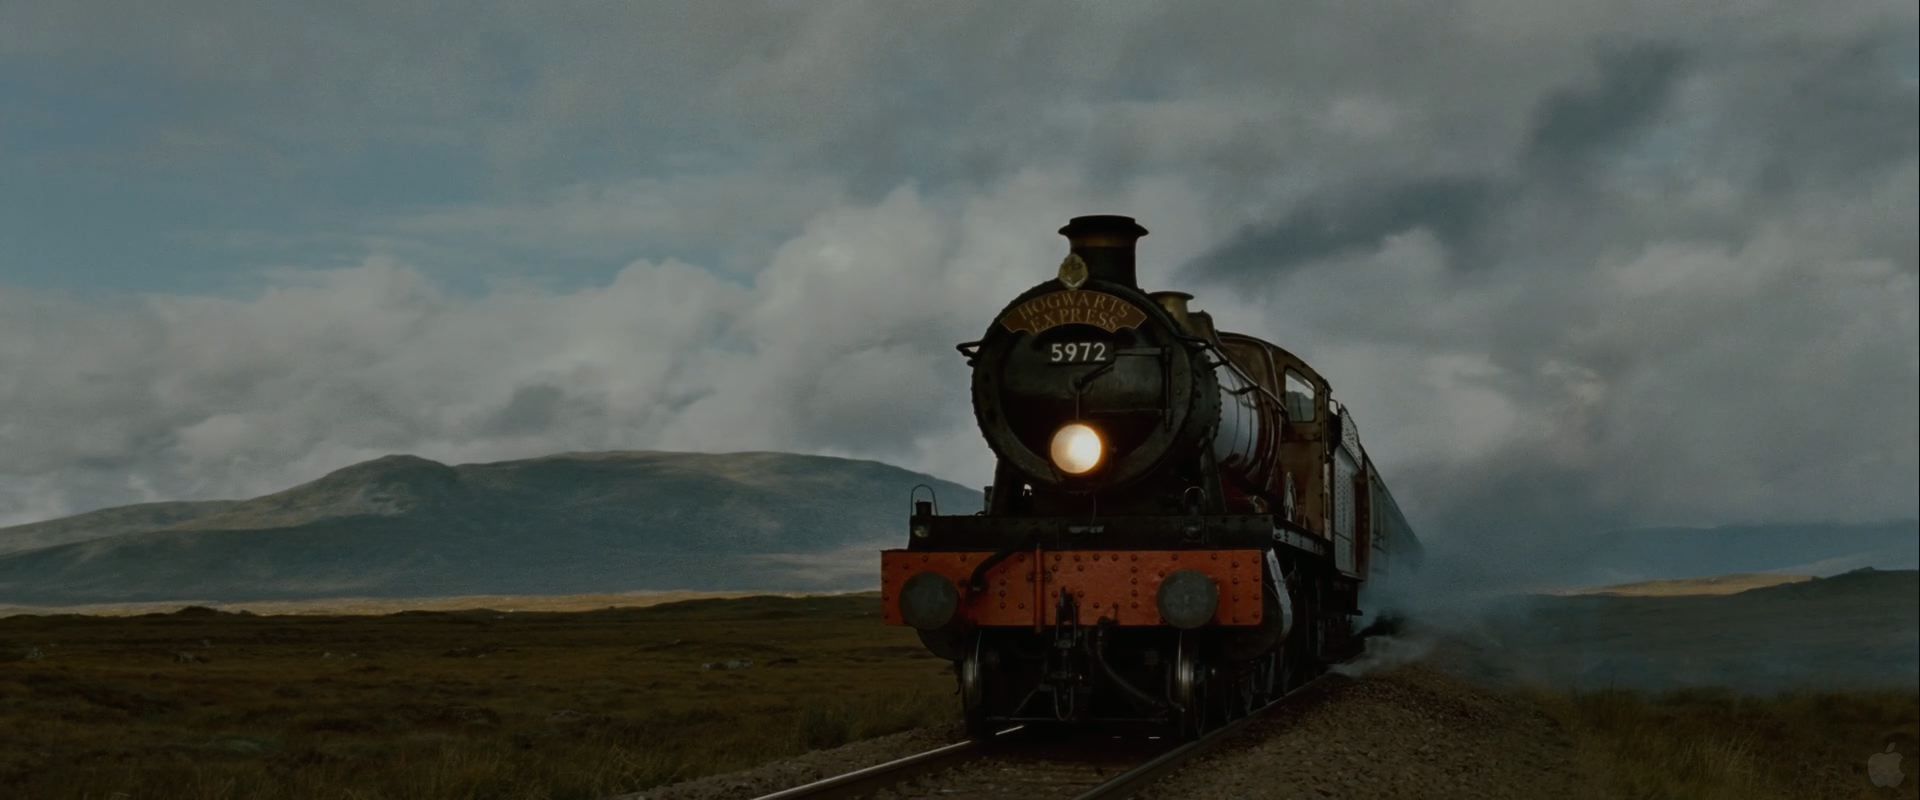 Hogwarts Express. Harry potter wallpaper, Harry potter picture, Deathly hallows wallpaper